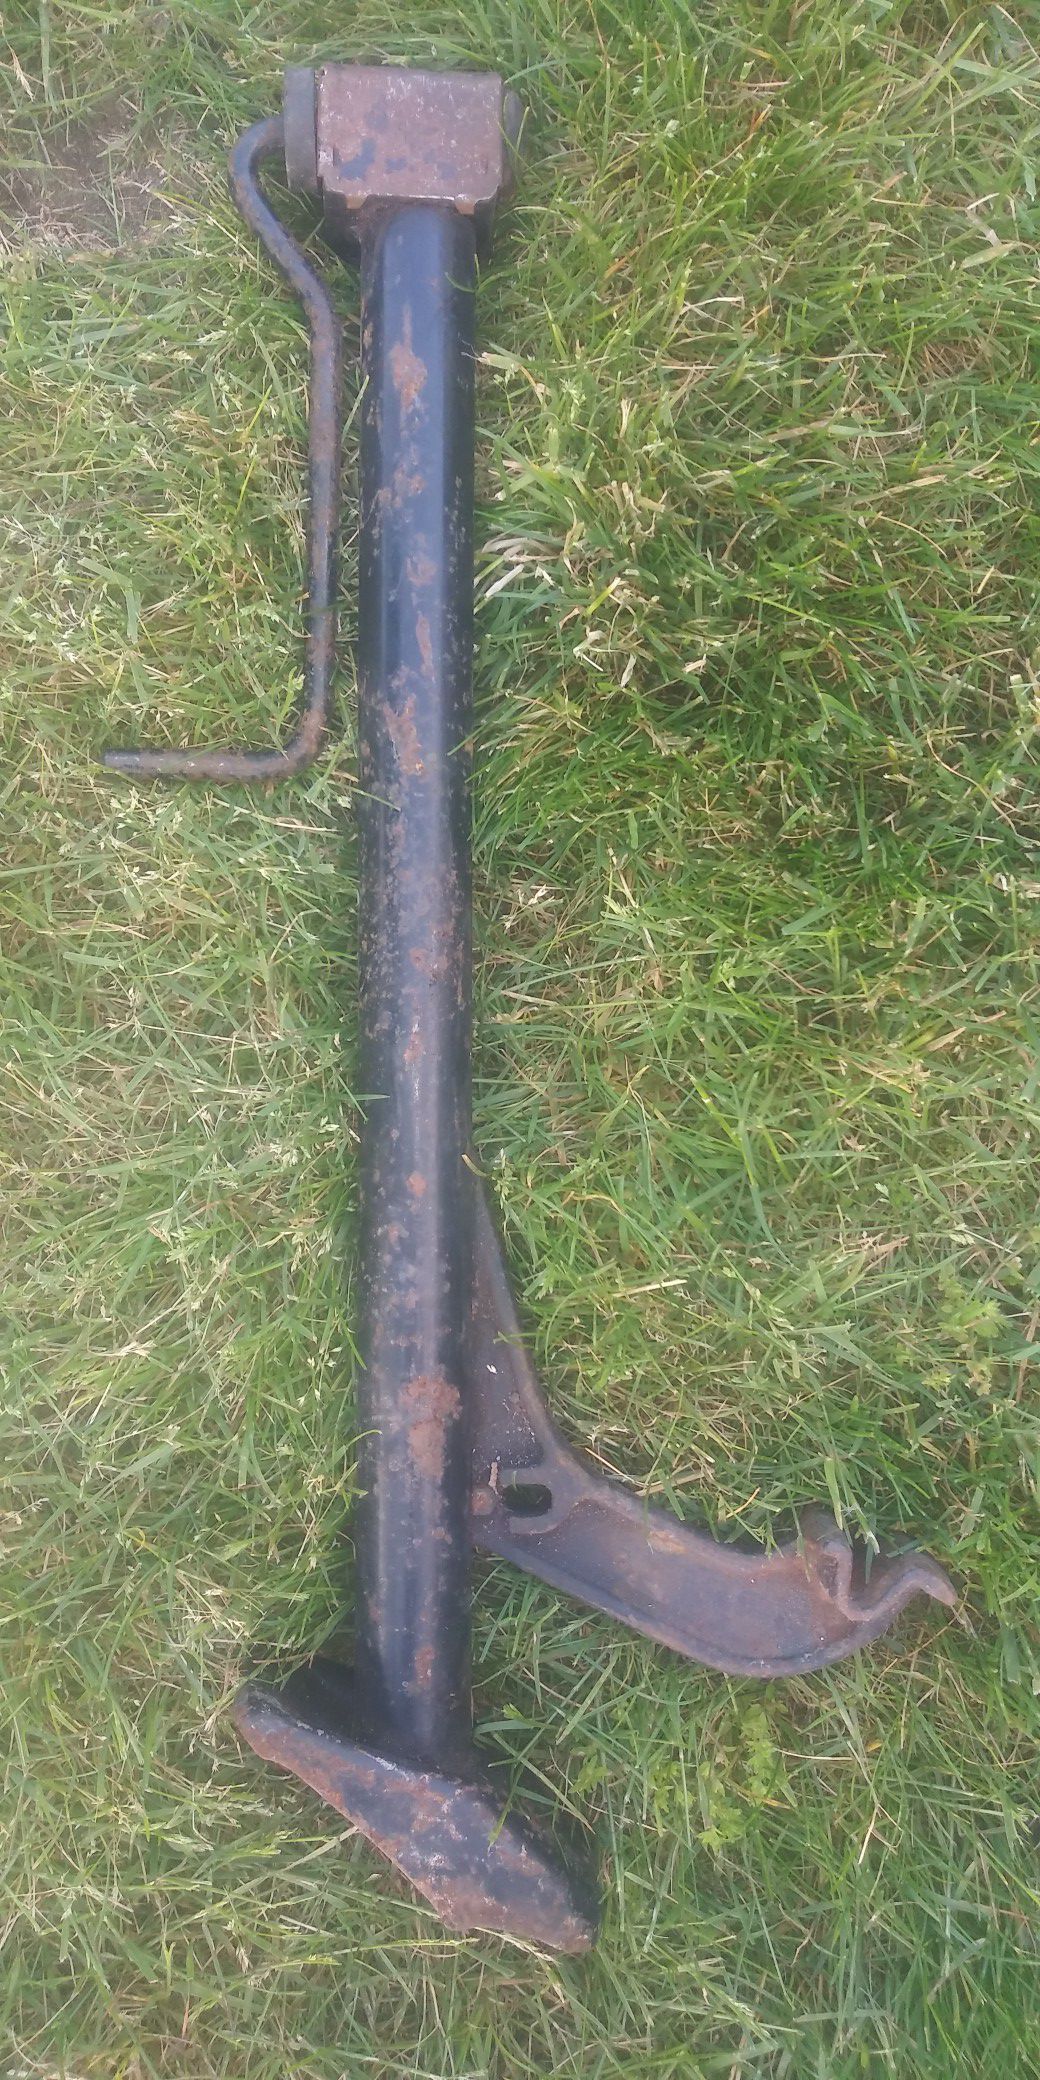 This is a 1933 Mercedes bumper Jack in good working condition the Jack was made by Bilstein